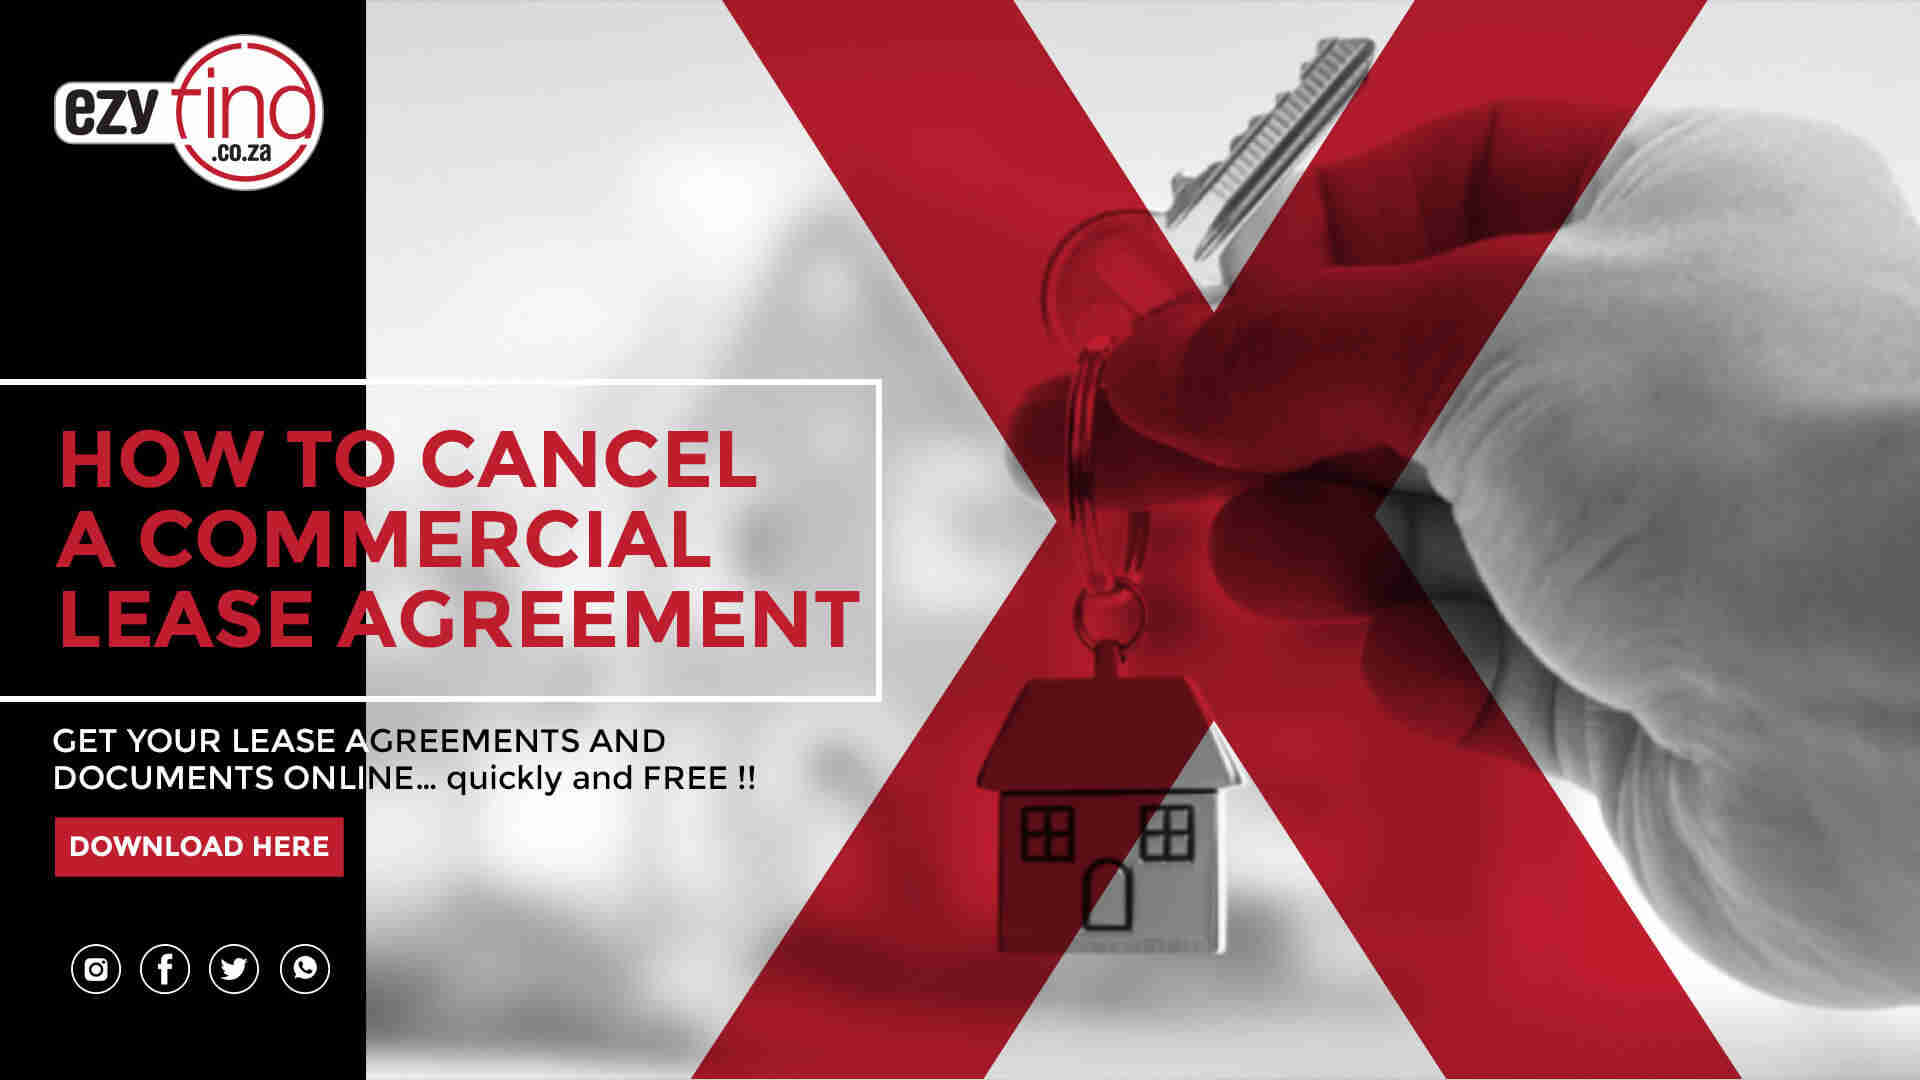 How to cancel a commercial lease agreement